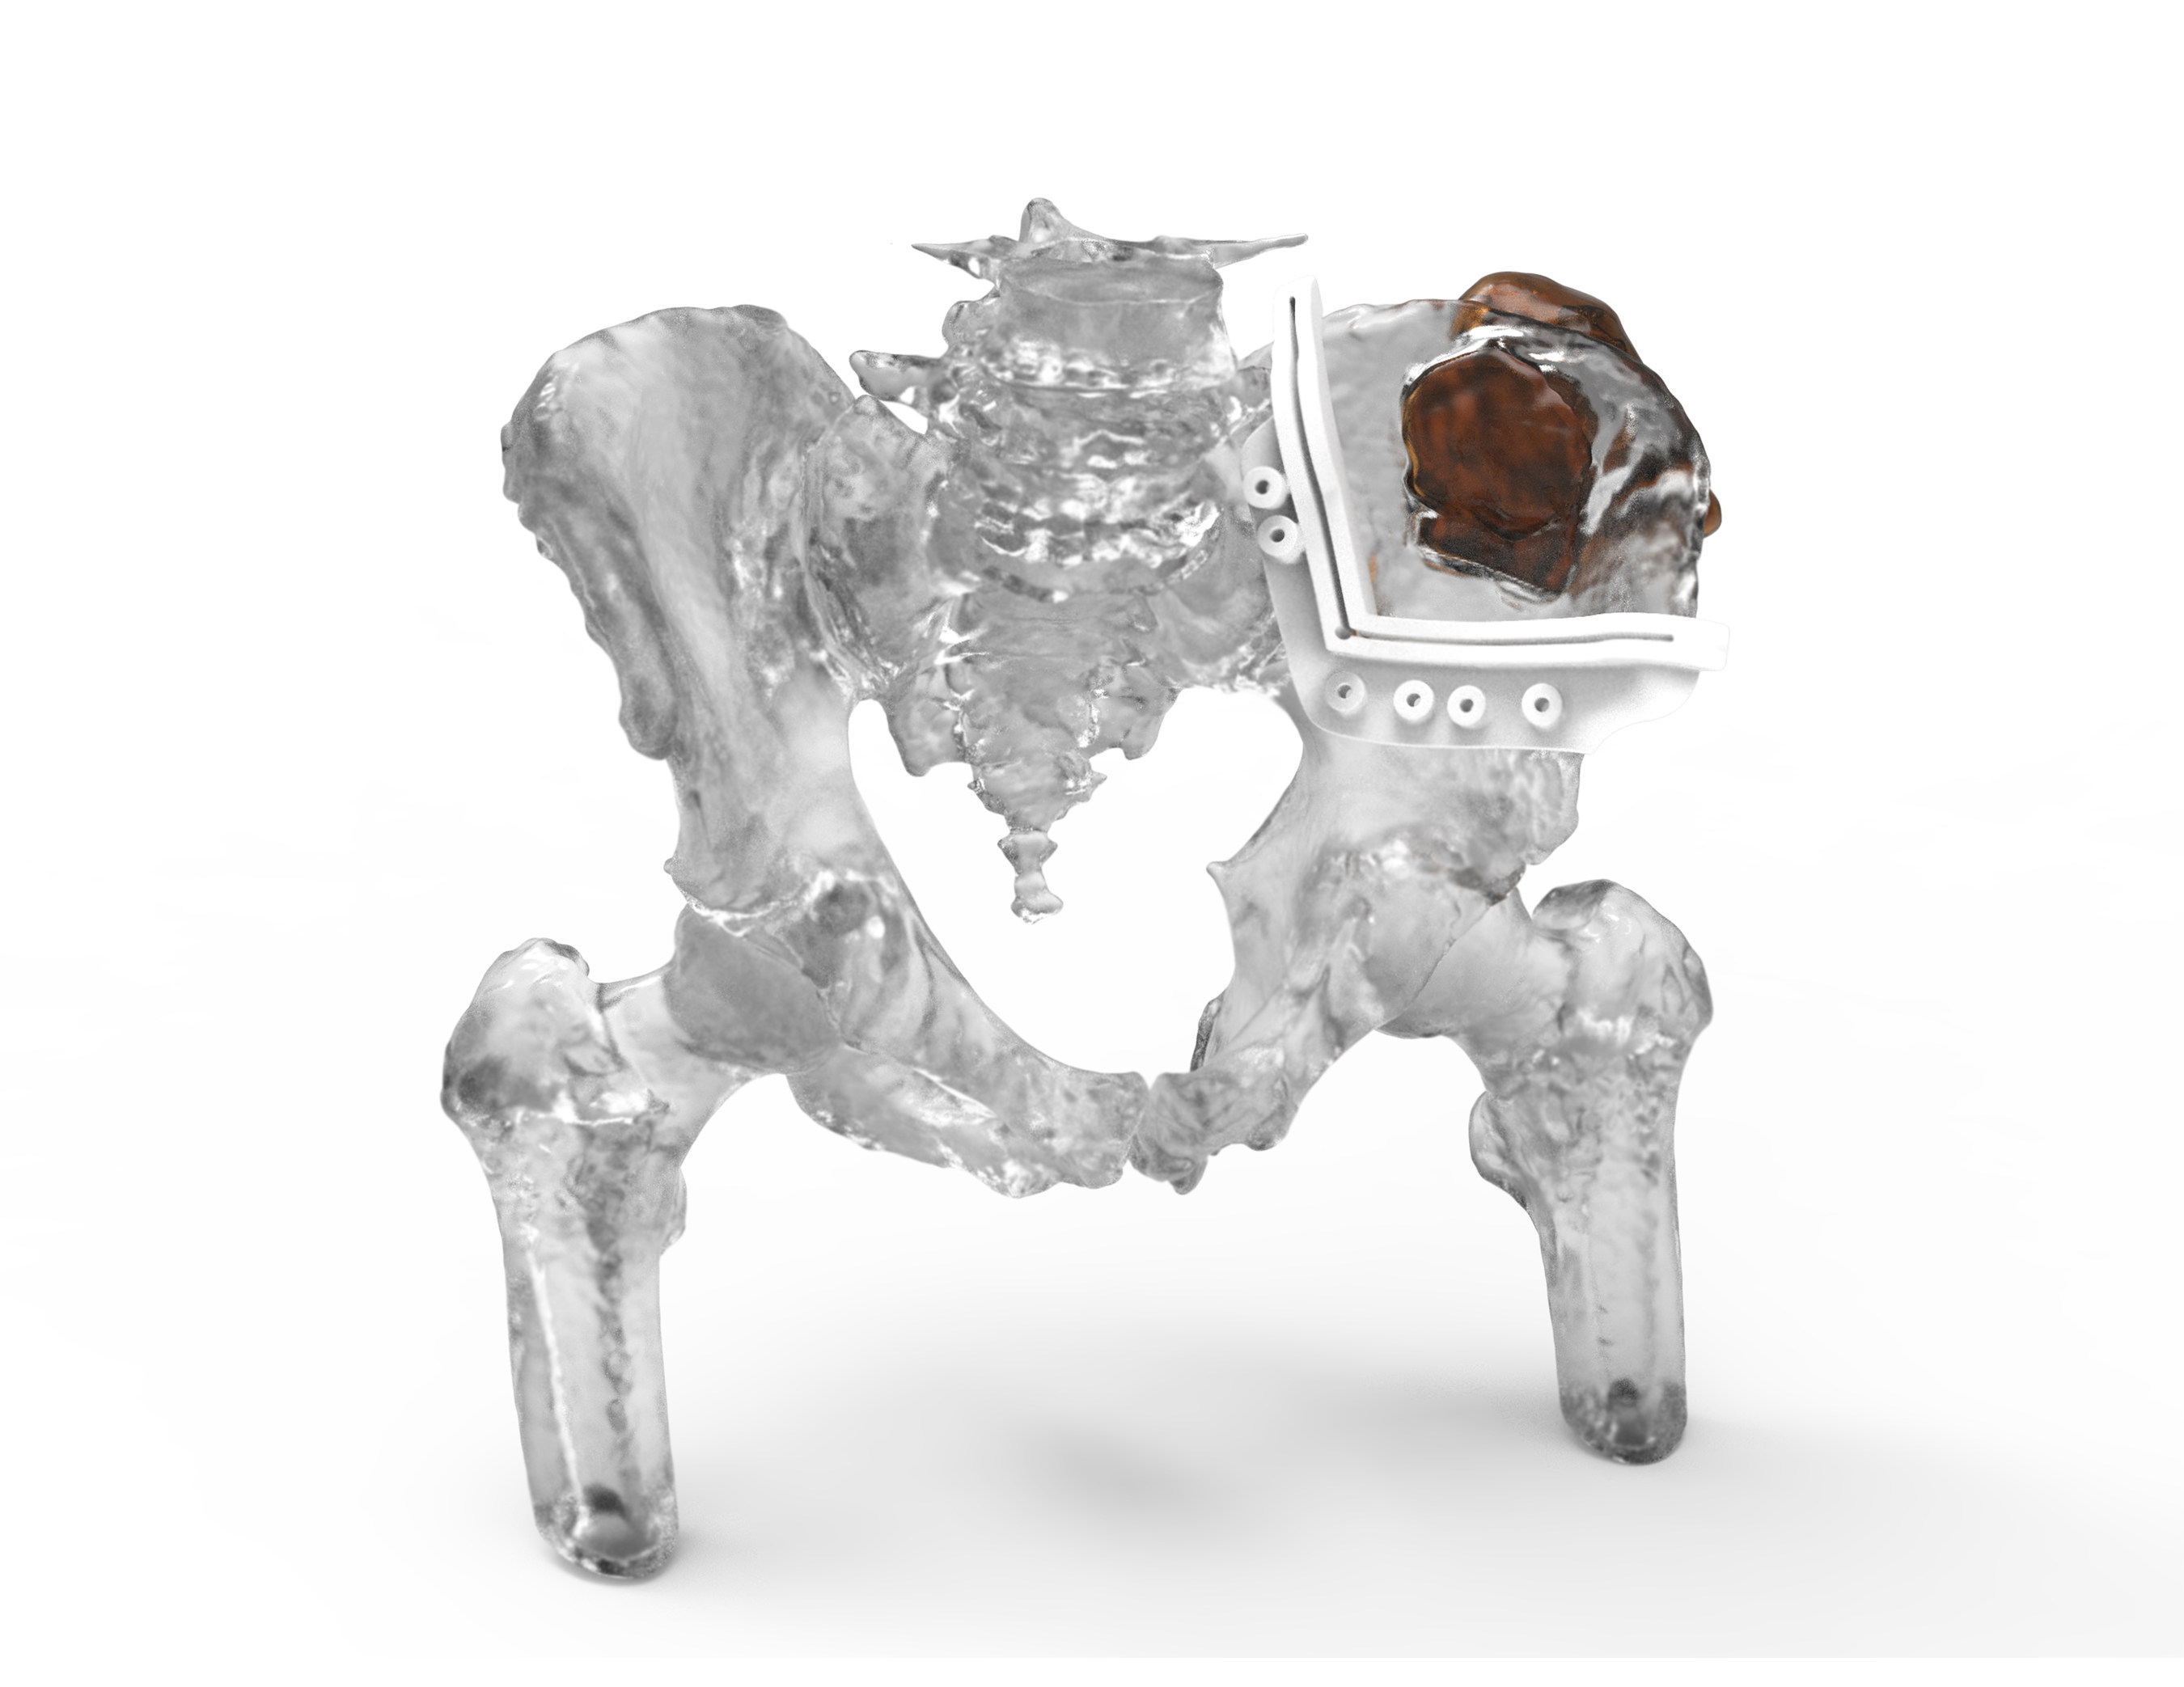 3D Systems’ FDA cleared VSP Orthopaedics solution enables surgeons to obtain a clear 3D visualization of a patient’s anatomy and develop a personalized surgical plan, prior to entering the operating room. Image via 3D Systems